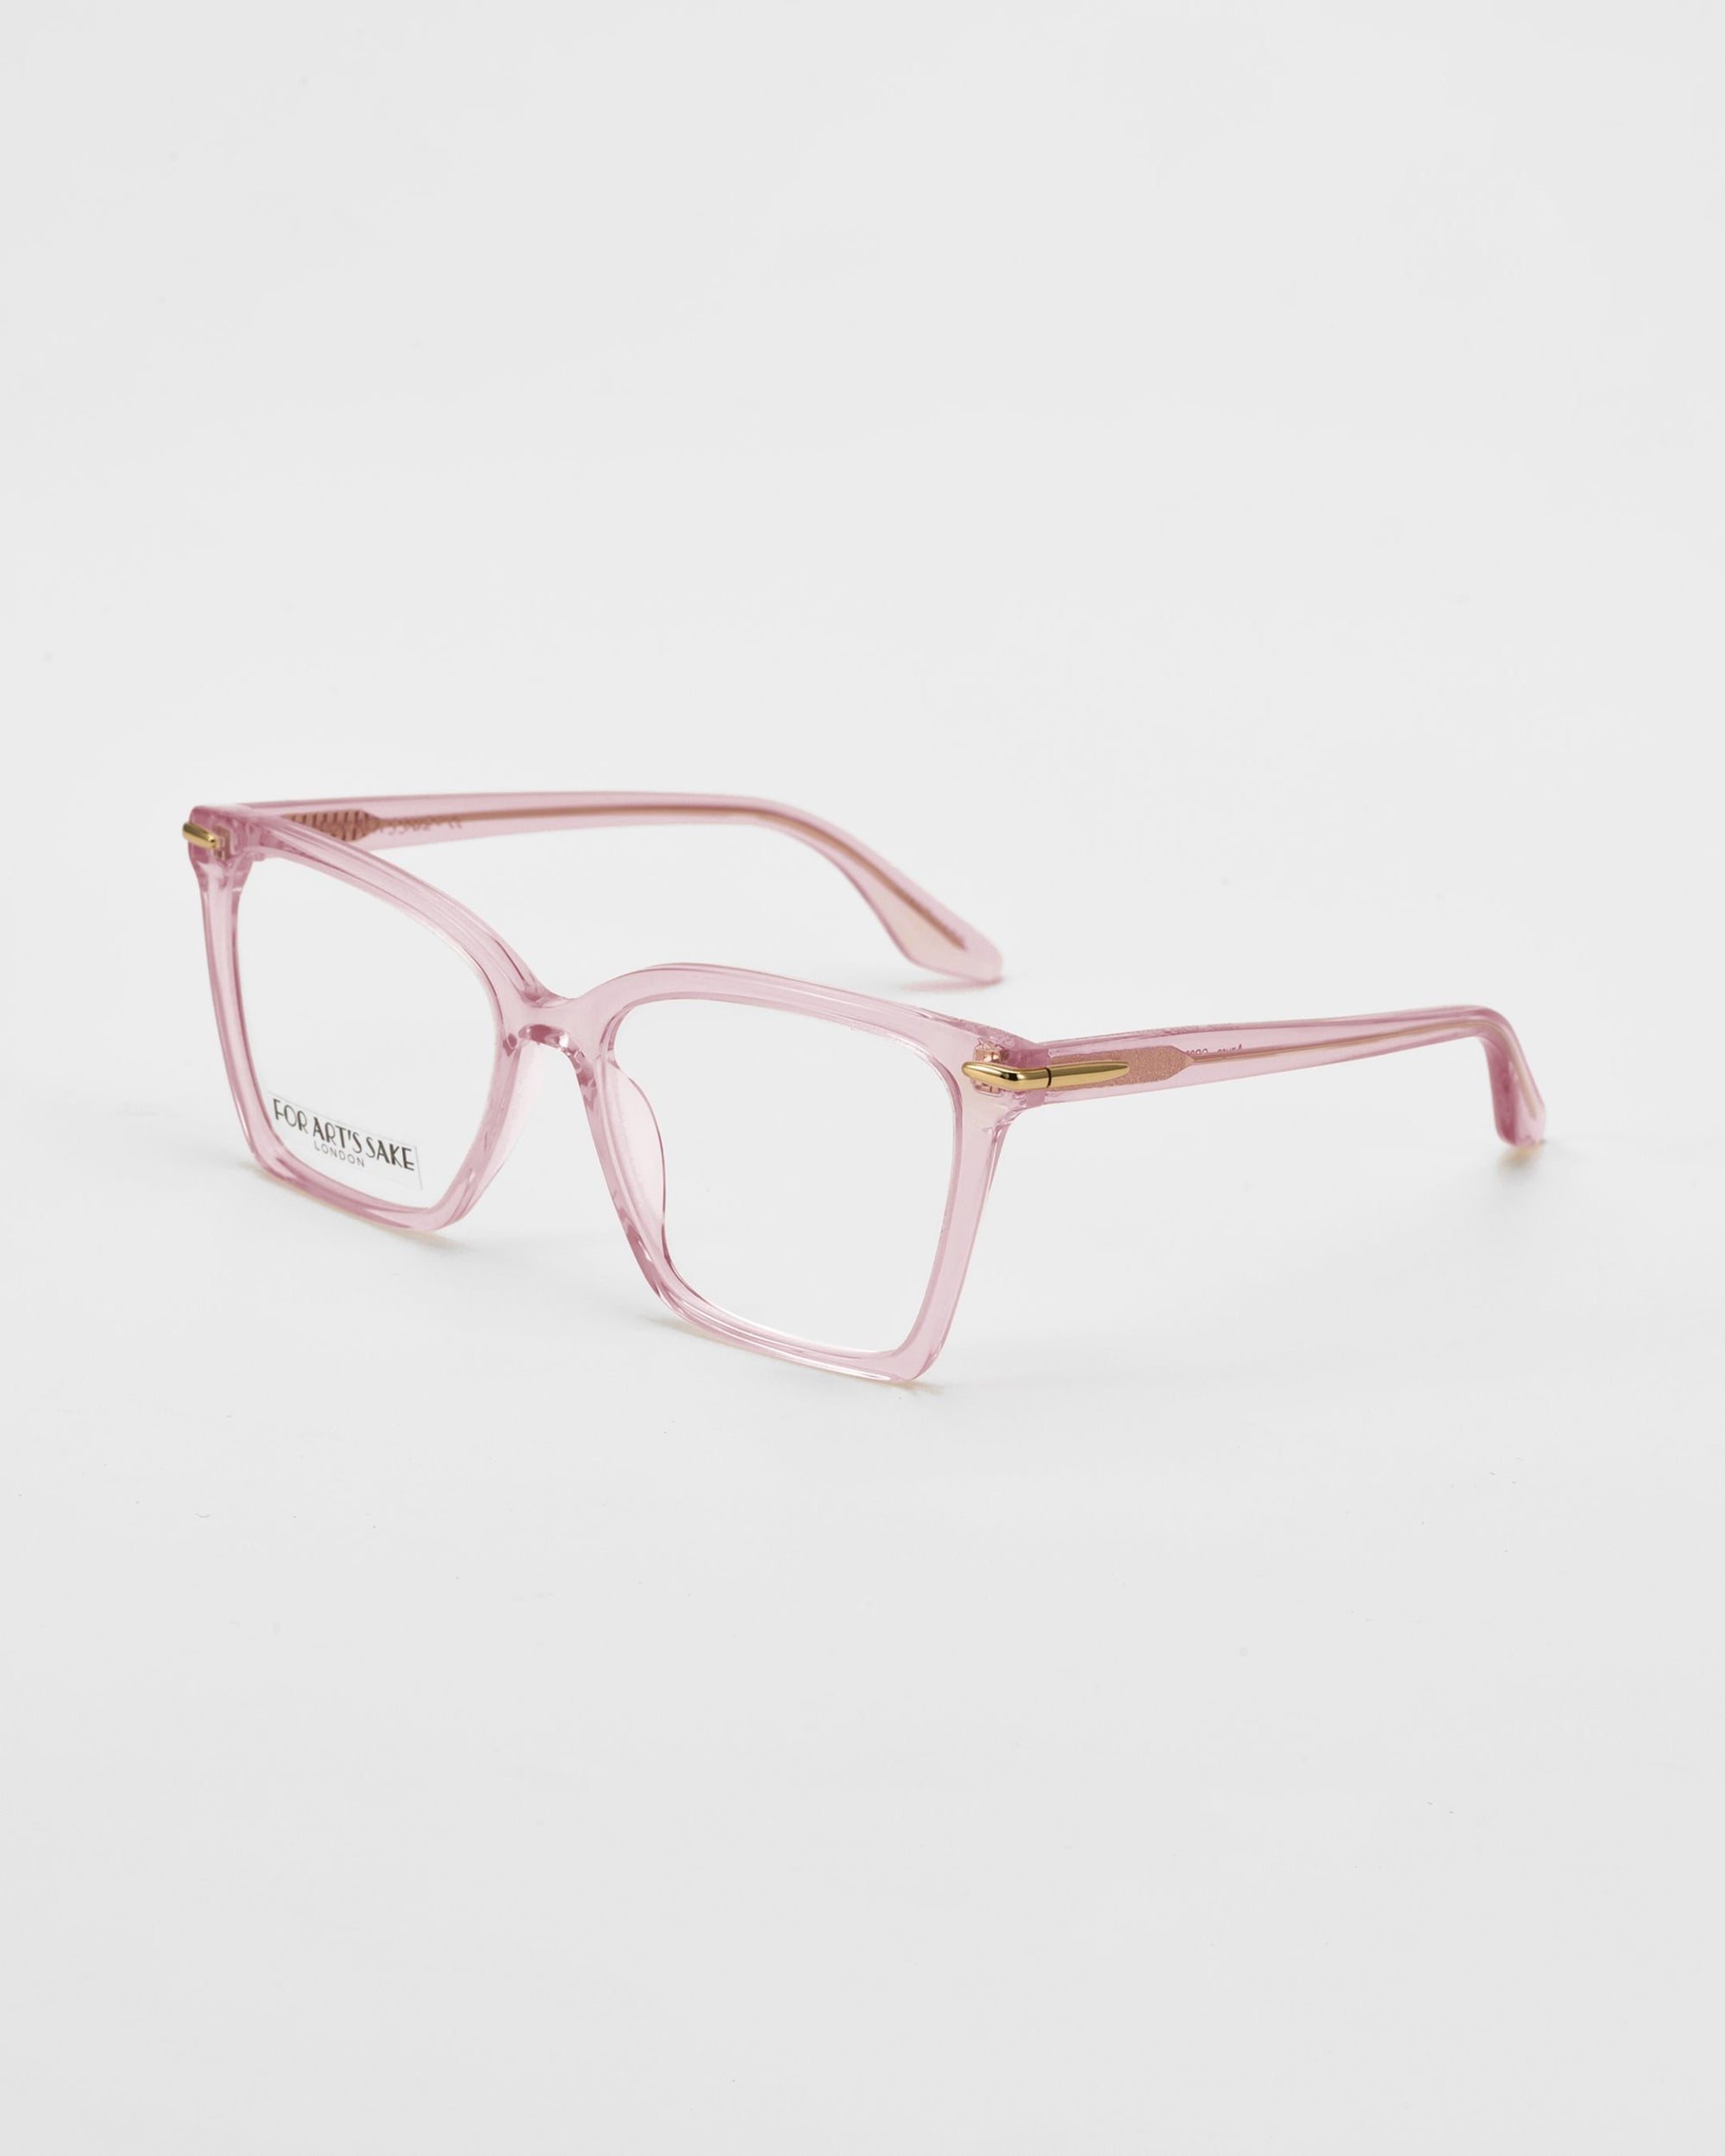 A pair of pink, rectangular eyeglasses with glossy acetate frames and clear lenses. The glasses have metal accents on the hinges and arms. The words &quot;For Art&#39;s Sake®&quot; are visible on one of the lenses. These Azure optical glasses are placed on a white background.